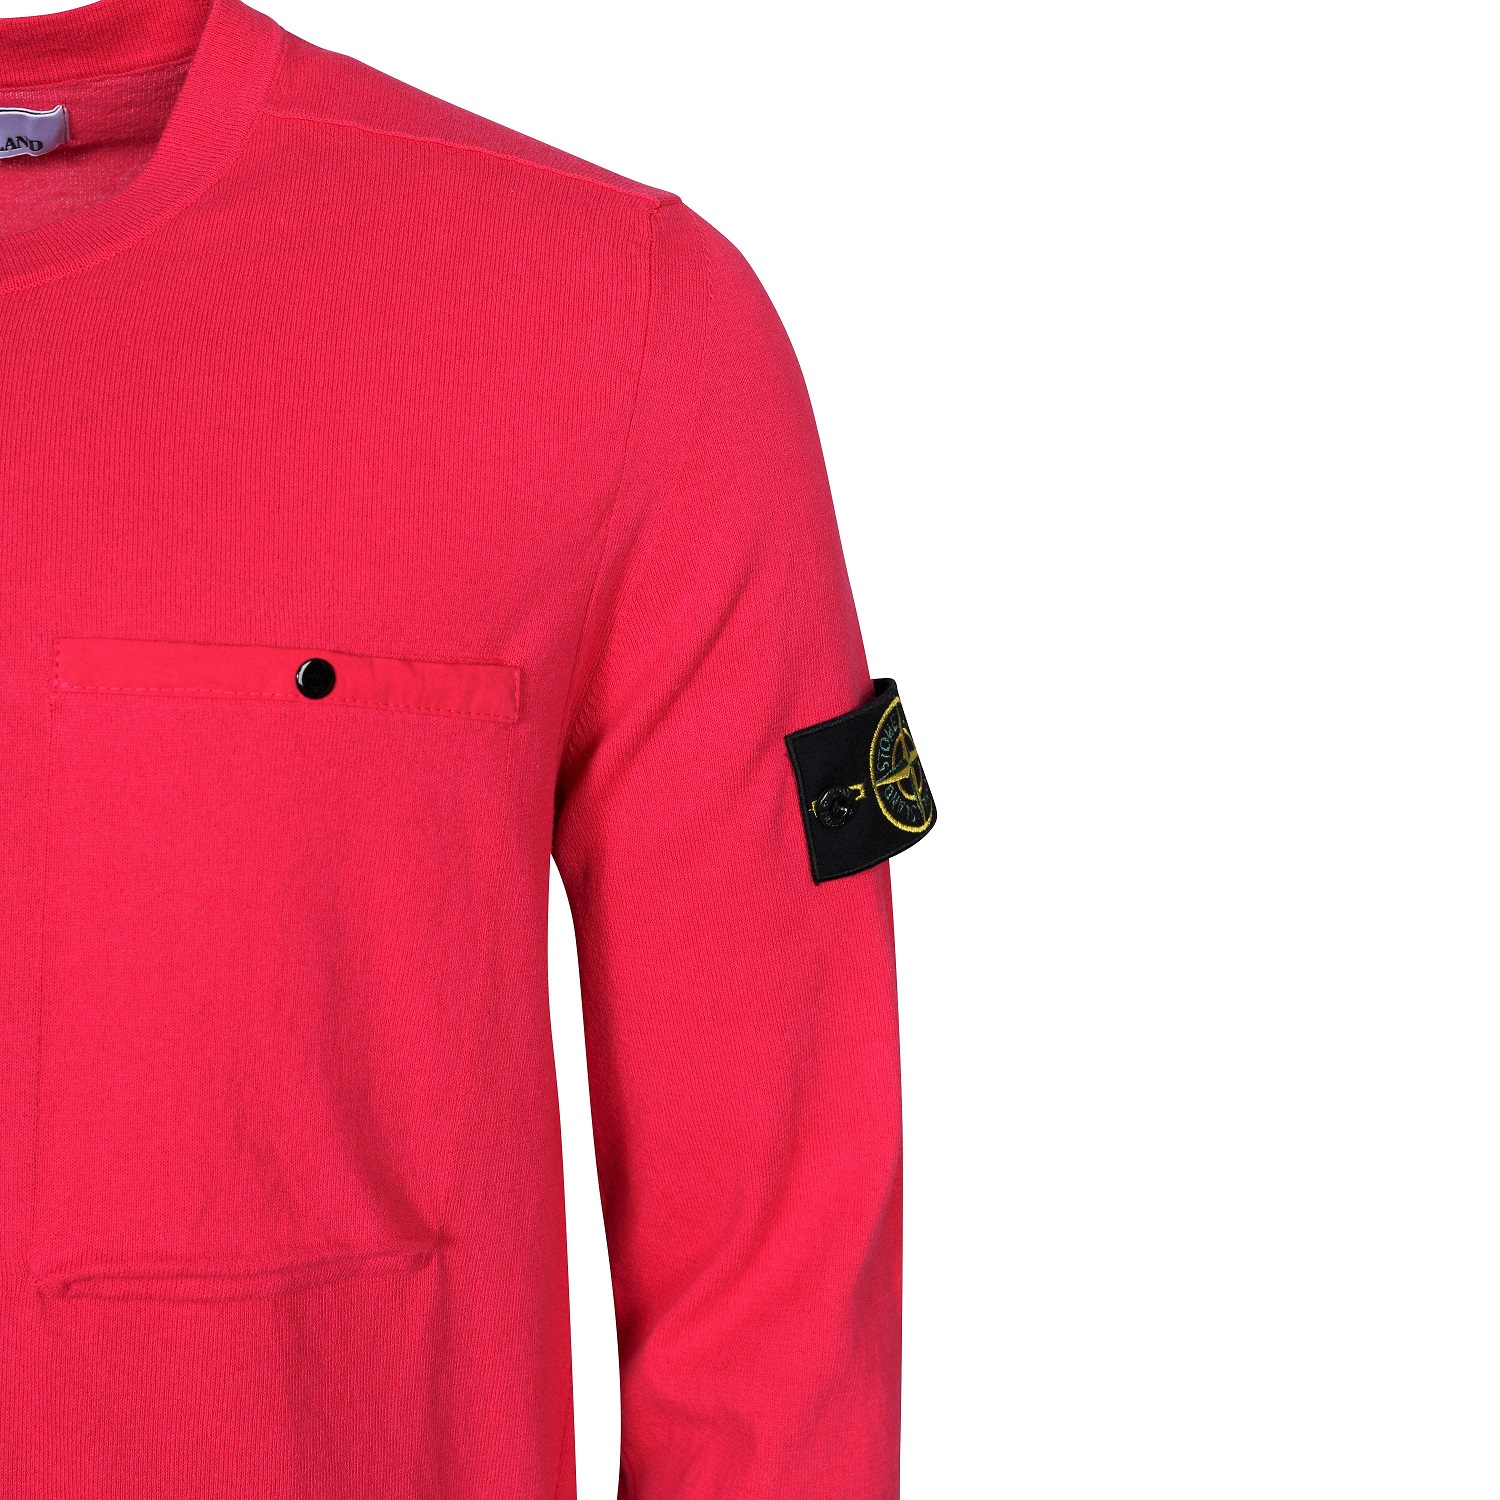 Stone Island Chest Pocket Knit Sweater in Pink M